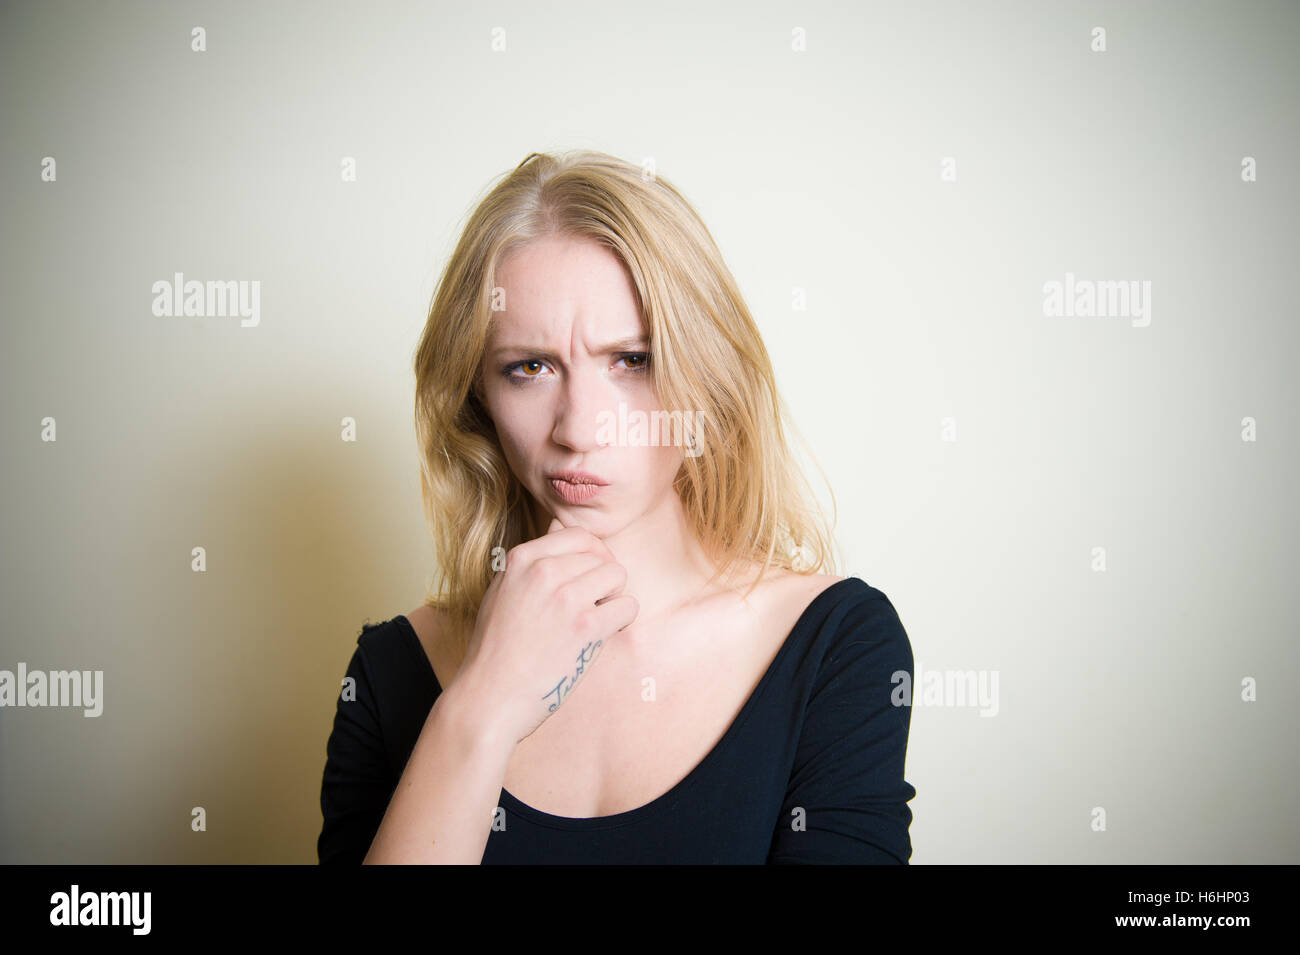 Young blond woman, doubtful and looking at camera copy space Stock Photo